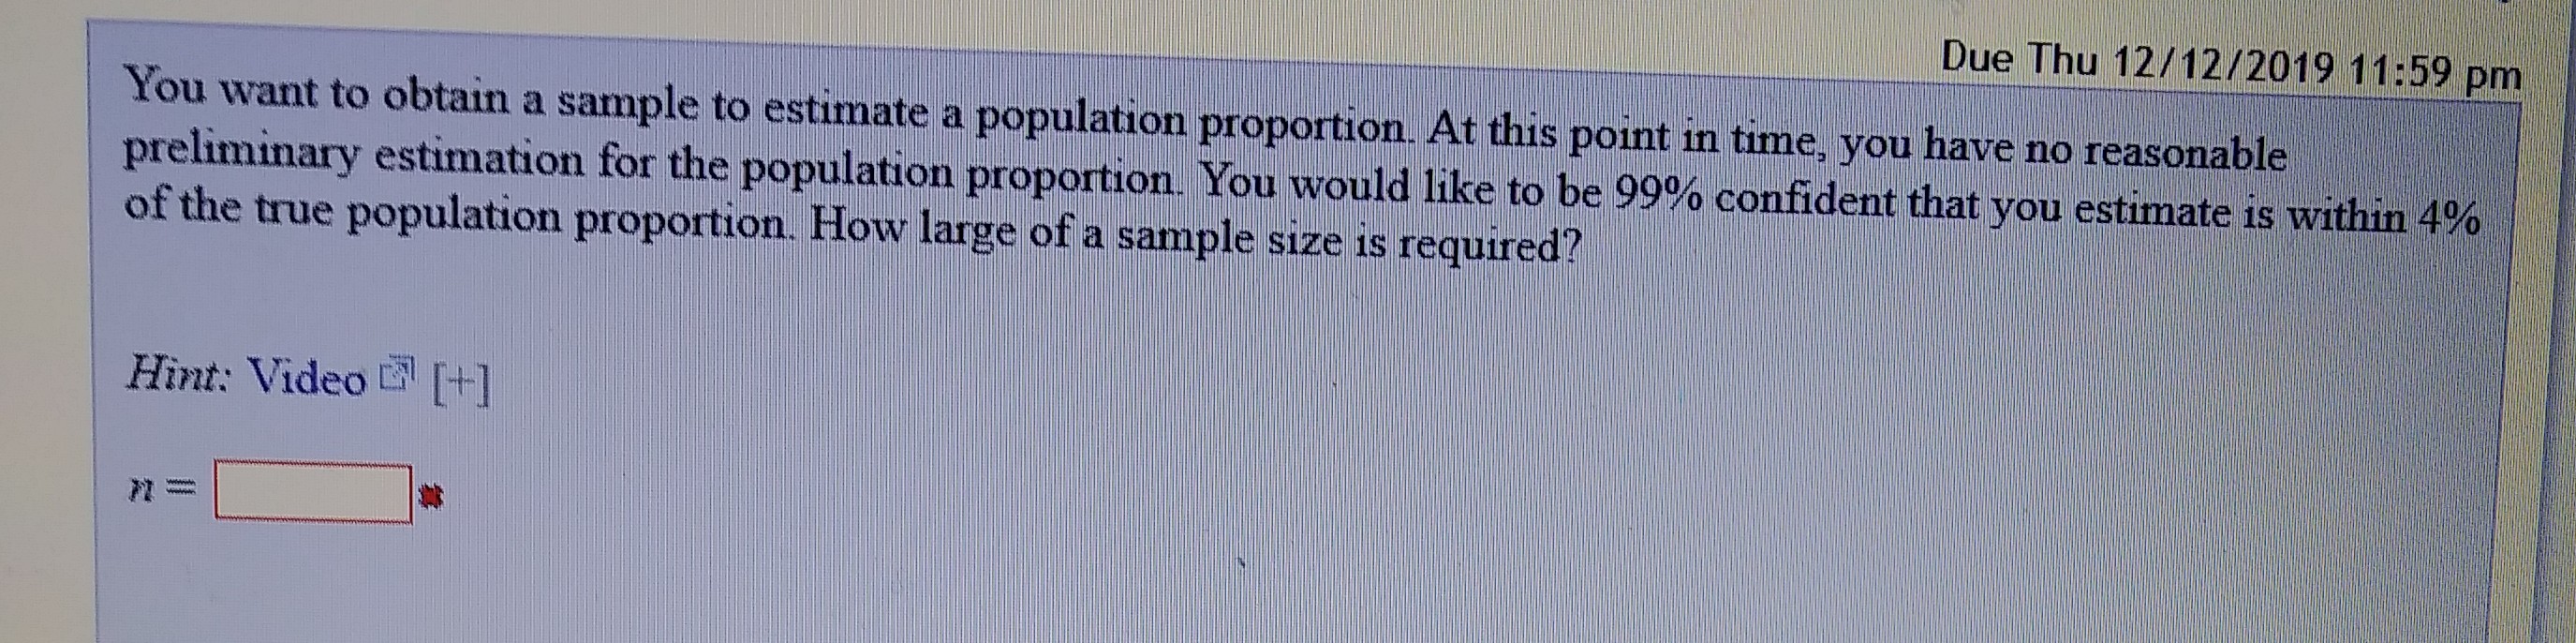 Due Thu 12/12/2019 11:59 pm
You want to obtain a sample to estimate a population proportion. At this point in time, you have no reasonable
preliminary estimation for the population proportion. You would like to be 99% confident that you estimate is within 4%
of the true population proportion. How large of a sample size is required?
Hìnt: Video +]
